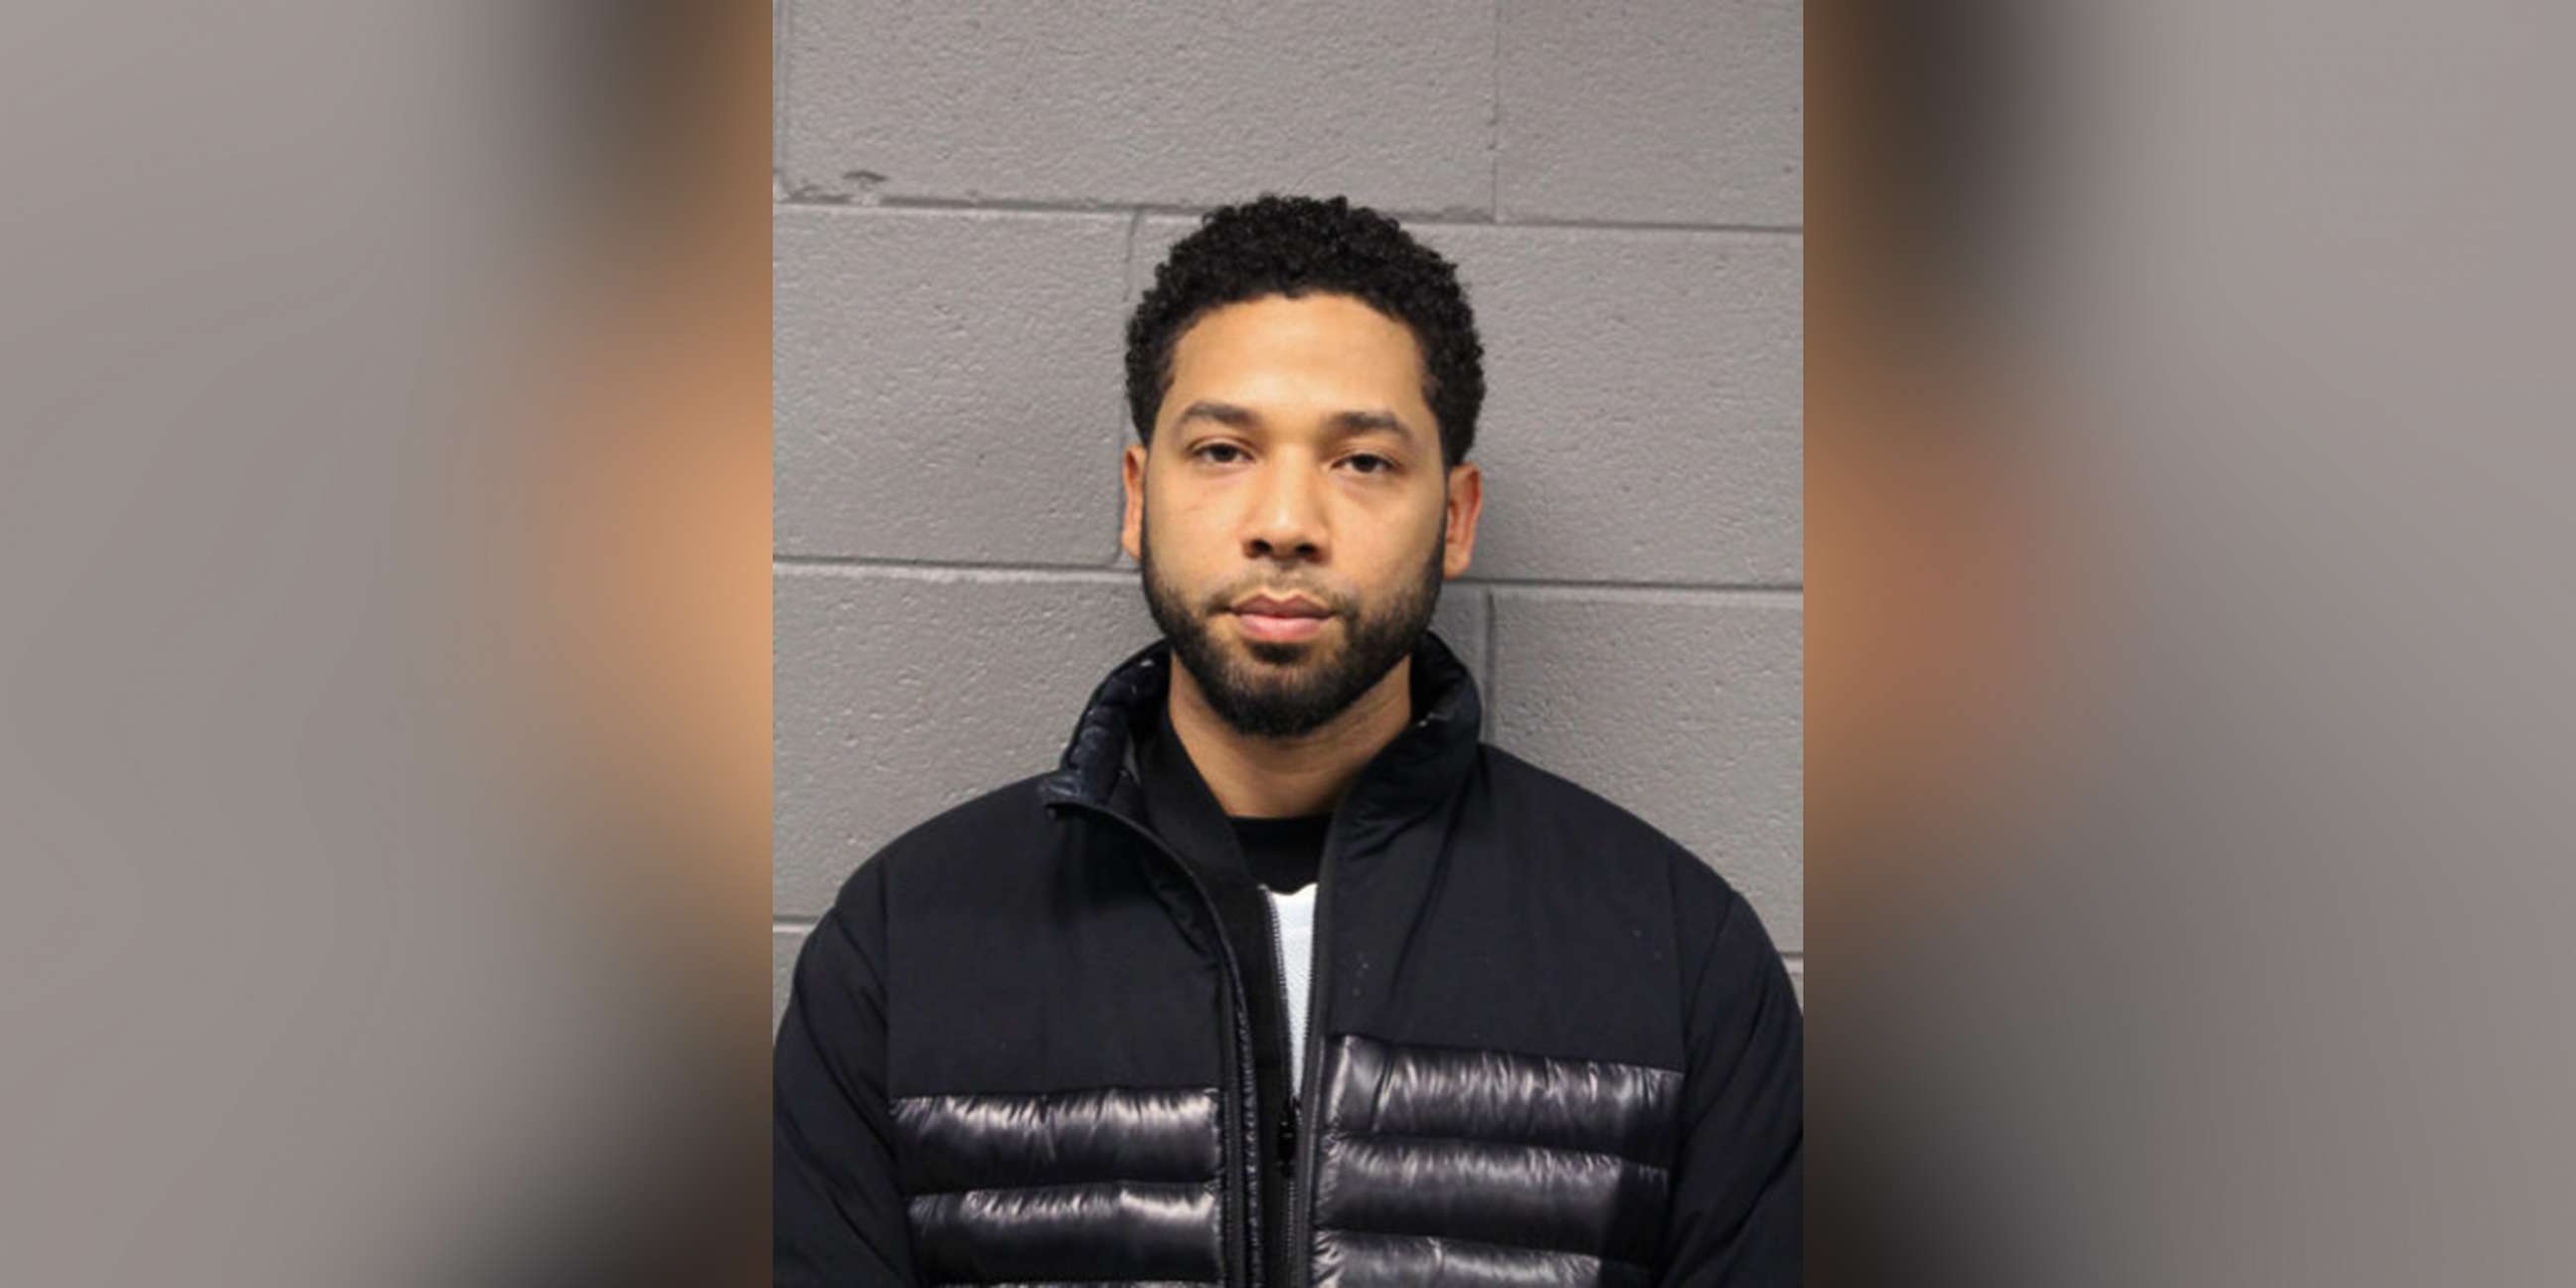 PHOTO: Jussie Smollett is pictured in a police mugshot after being charged with making a false police report.